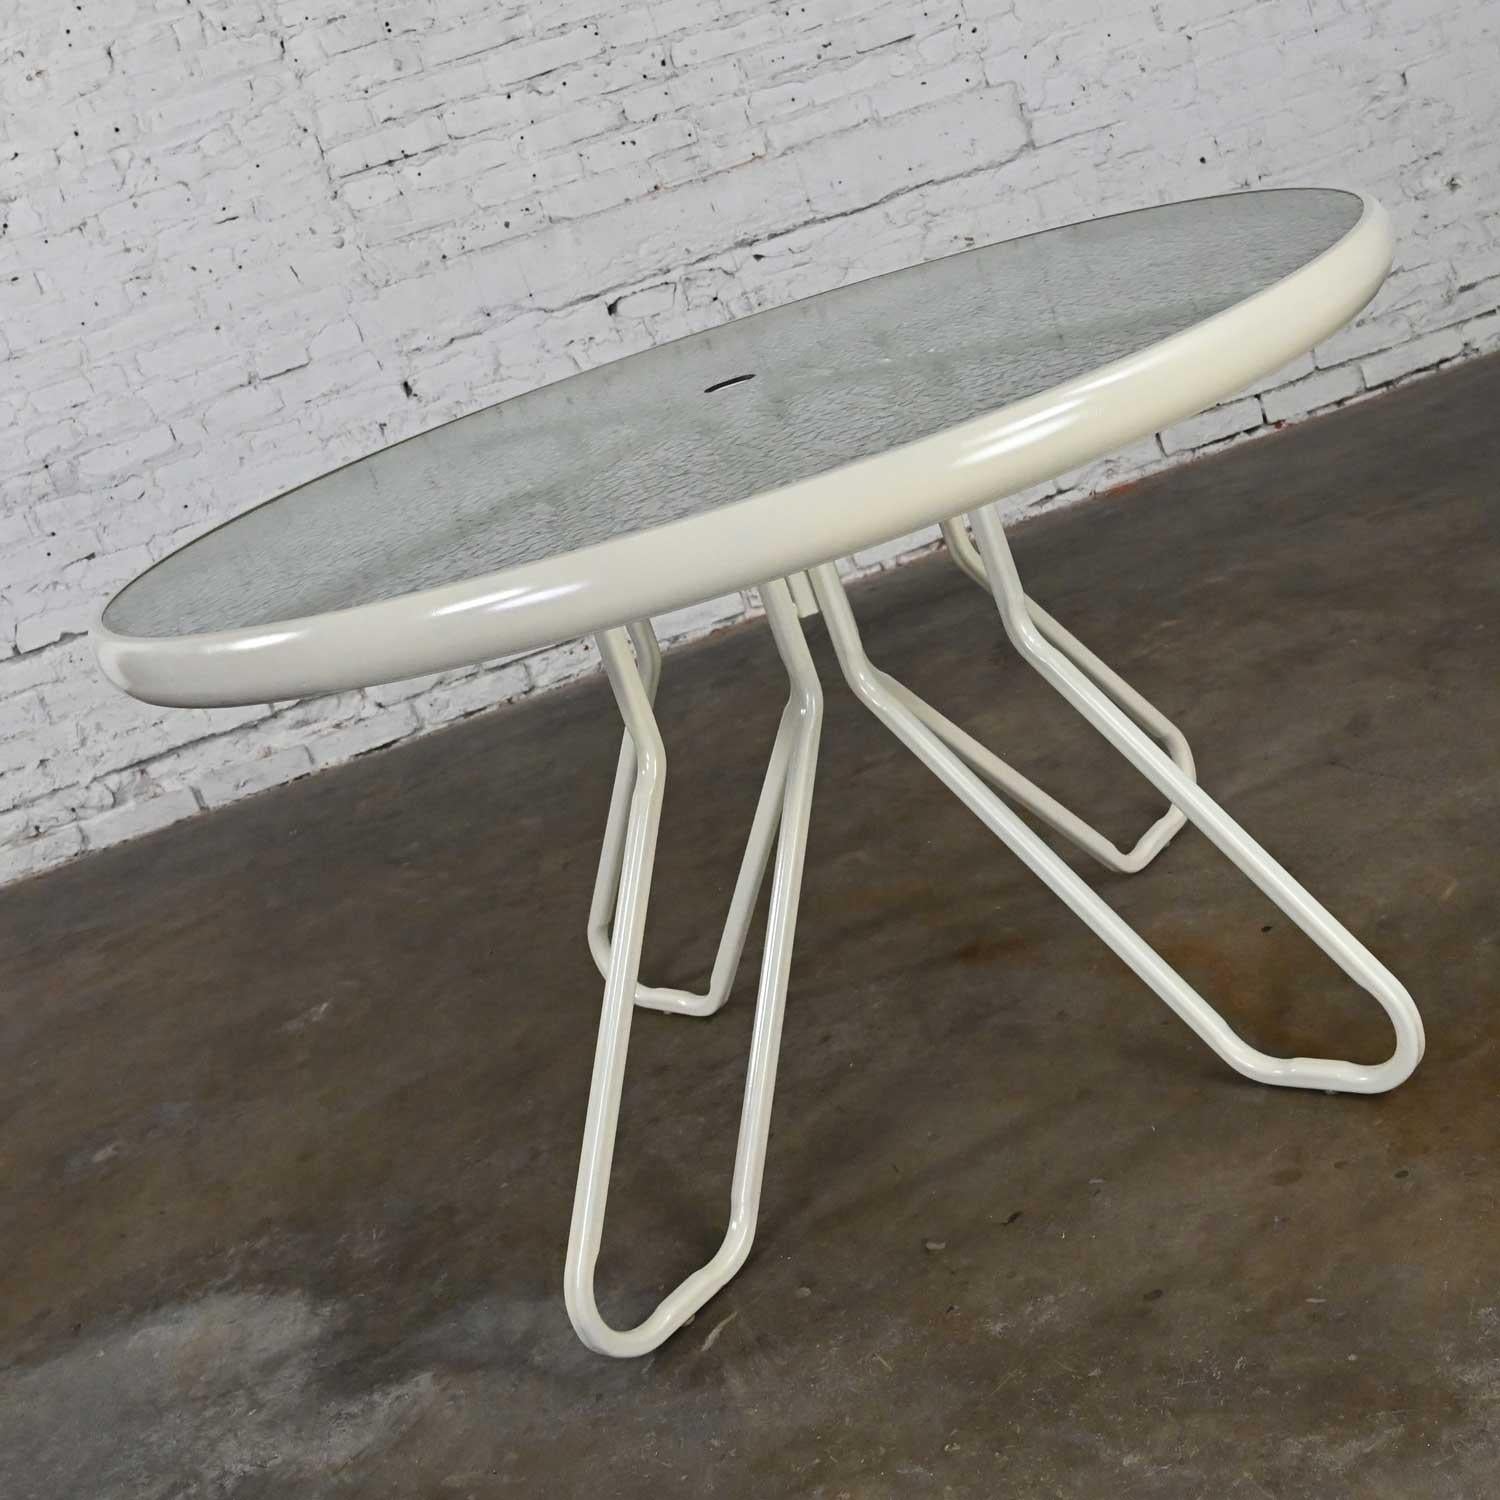 MCM Style Tropitone Outdoor Dining Table Pedestal Base Round Dimpled Glass Top In Good Condition For Sale In Topeka, KS